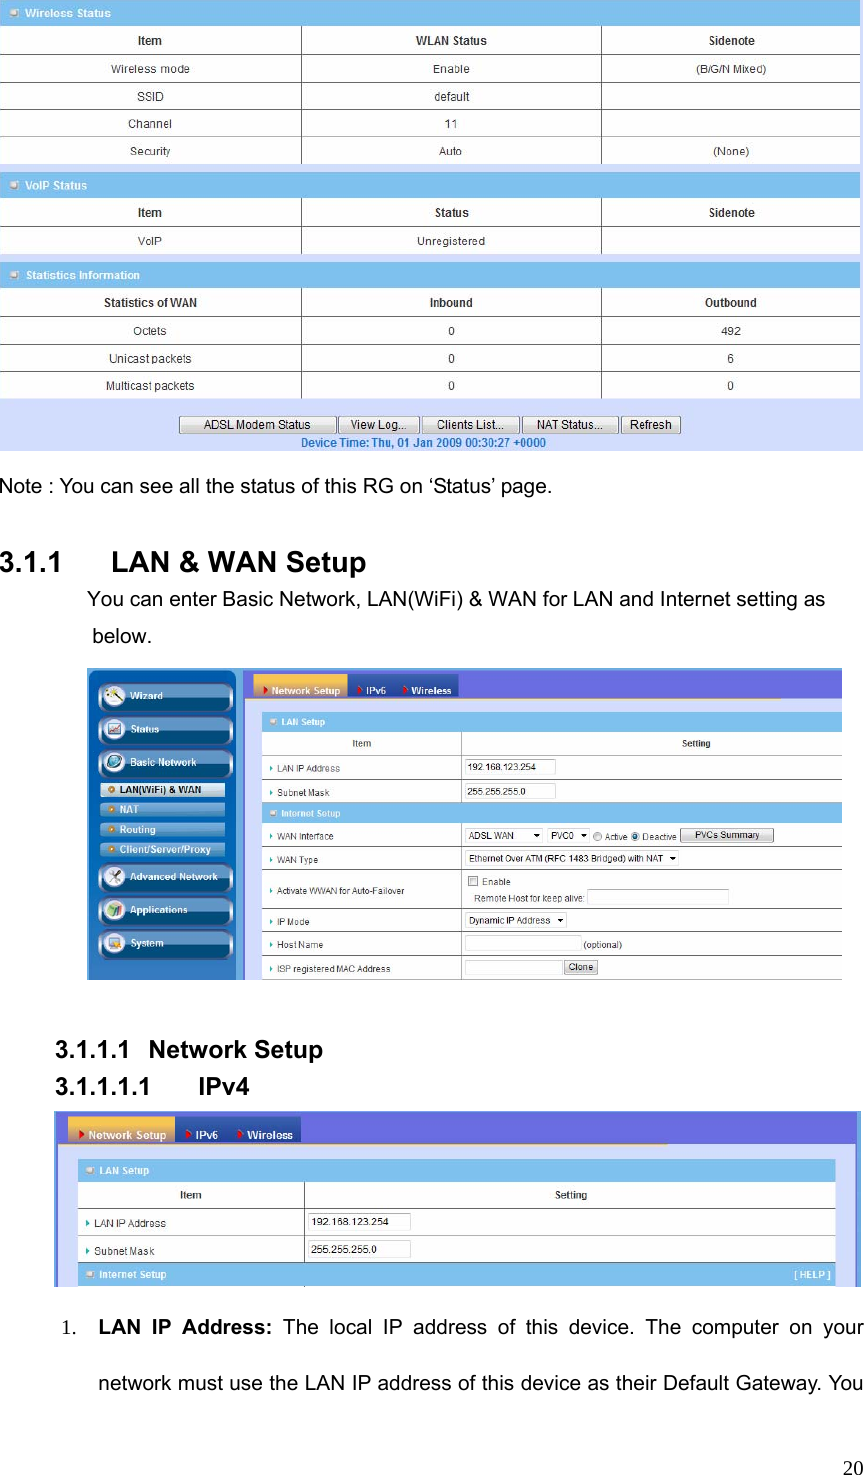  20 Note : You can see all the status of this RG on ‘Status’ page.  3.1.1  LAN &amp; WAN Setup You can enter Basic Network, LAN(WiFi) &amp; WAN for LAN and Internet setting as below.   3.1.1.1 Network Setup 3.1.1.1.1 IPv4  1. LAN IP Address: The local IP address of this device. The computer on your network must use the LAN IP address of this device as their Default Gateway. You 